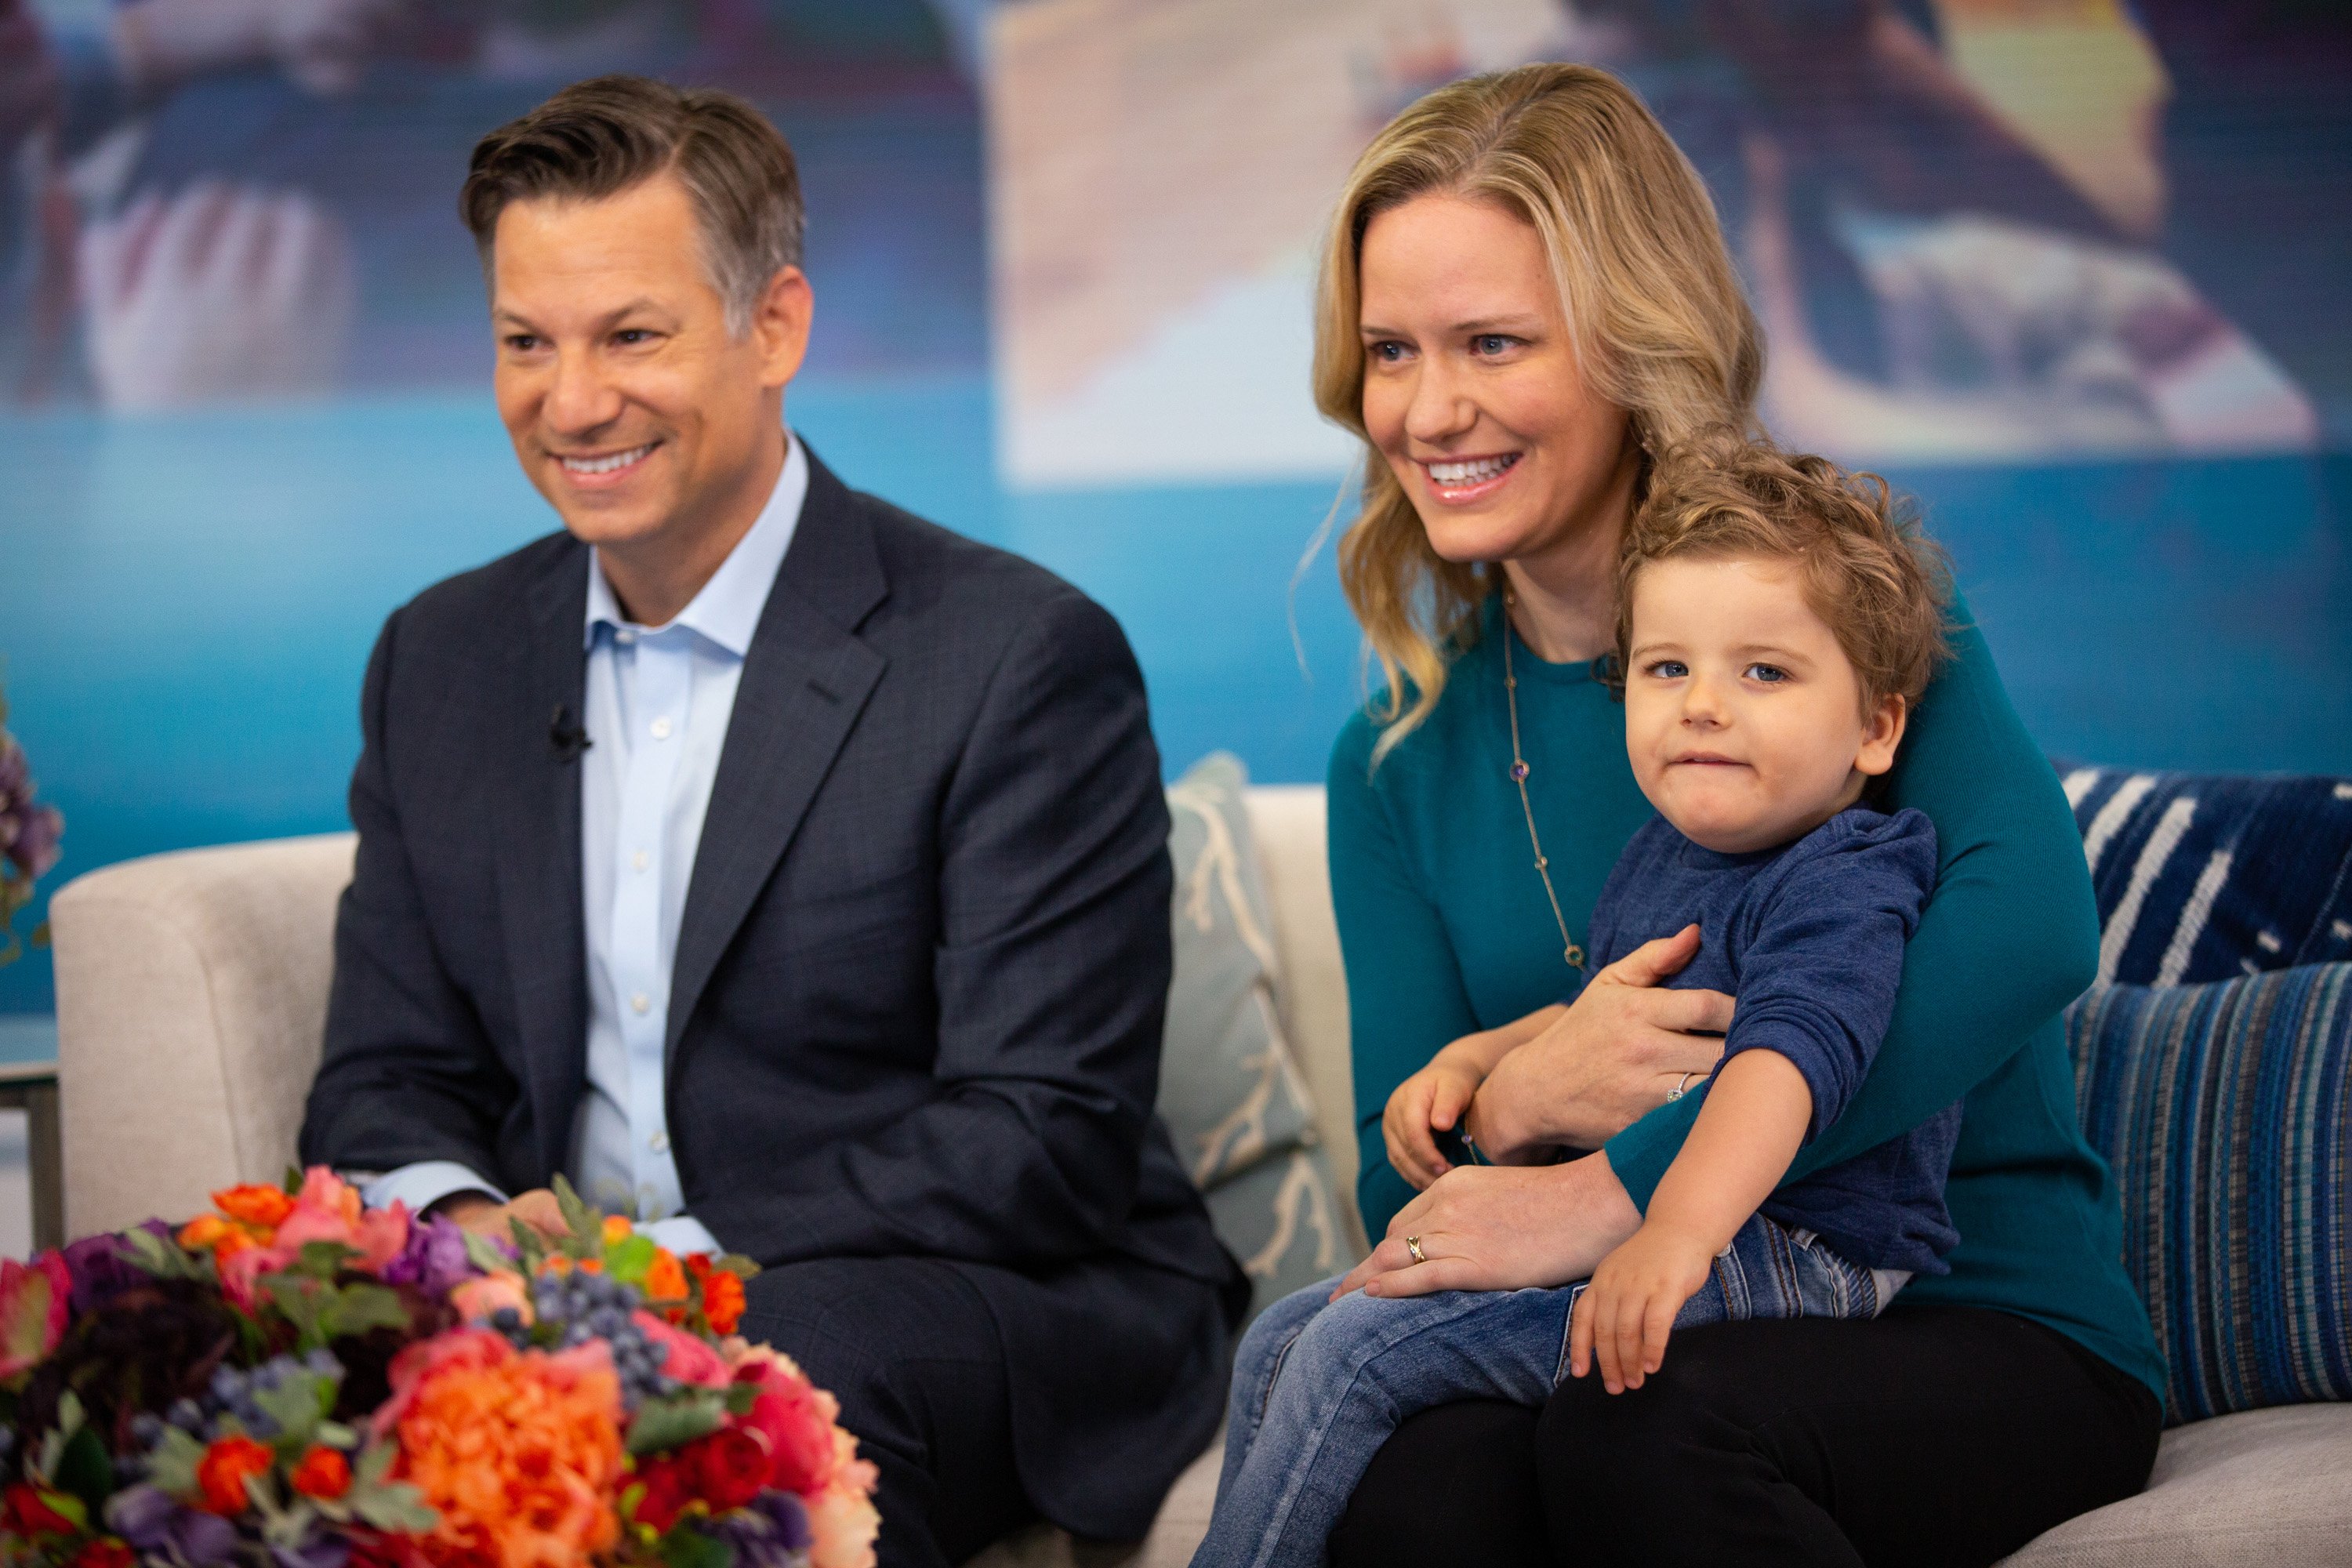 Richard Engel and his wife Mary Forrest, with son Henry during an appearance on the "TODAY" show on October 3, 2018 ┃Source: Getty Images